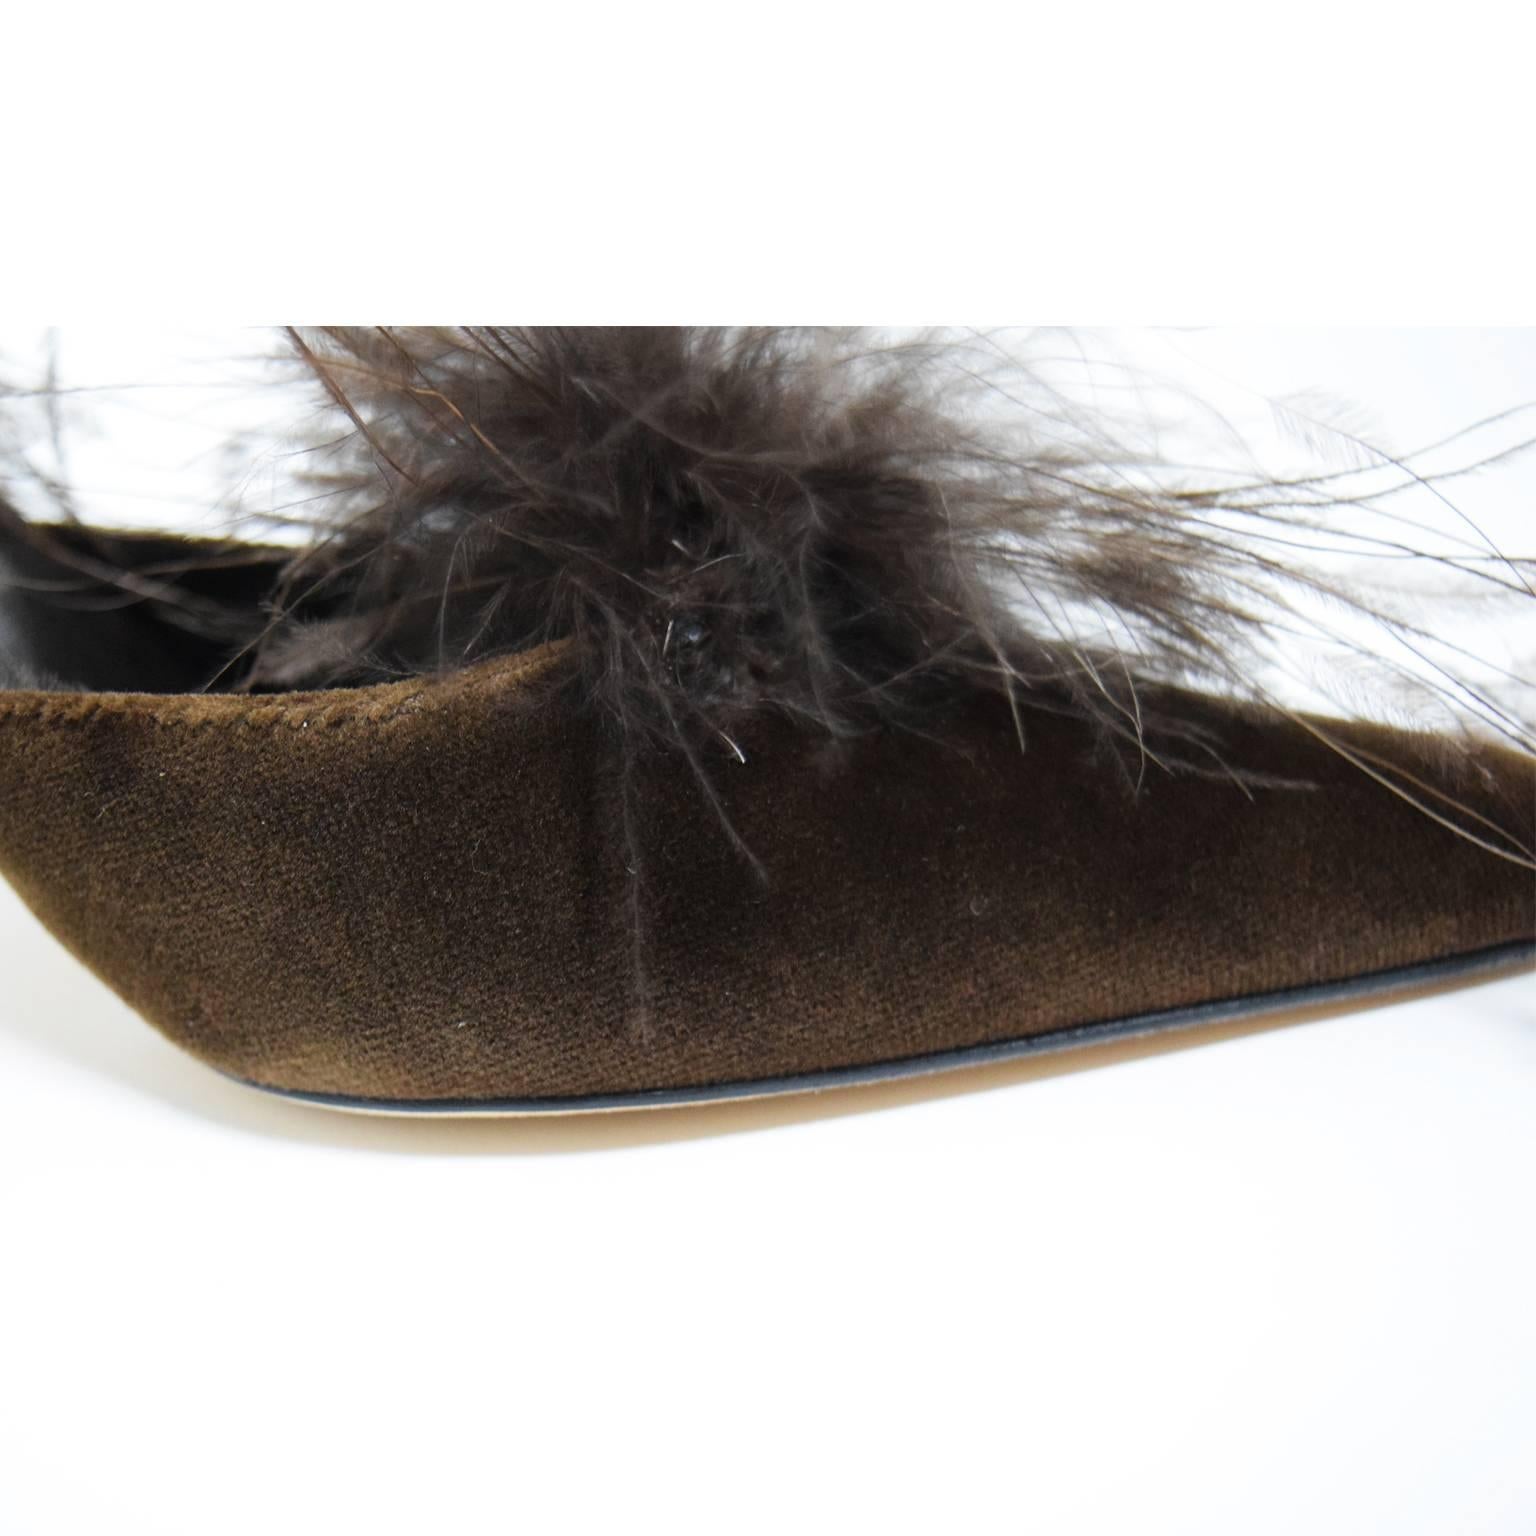 Rene Caovilla Feather Embellished Chocolate Brown Slide Mule In Excellent Condition For Sale In Henrico, VA